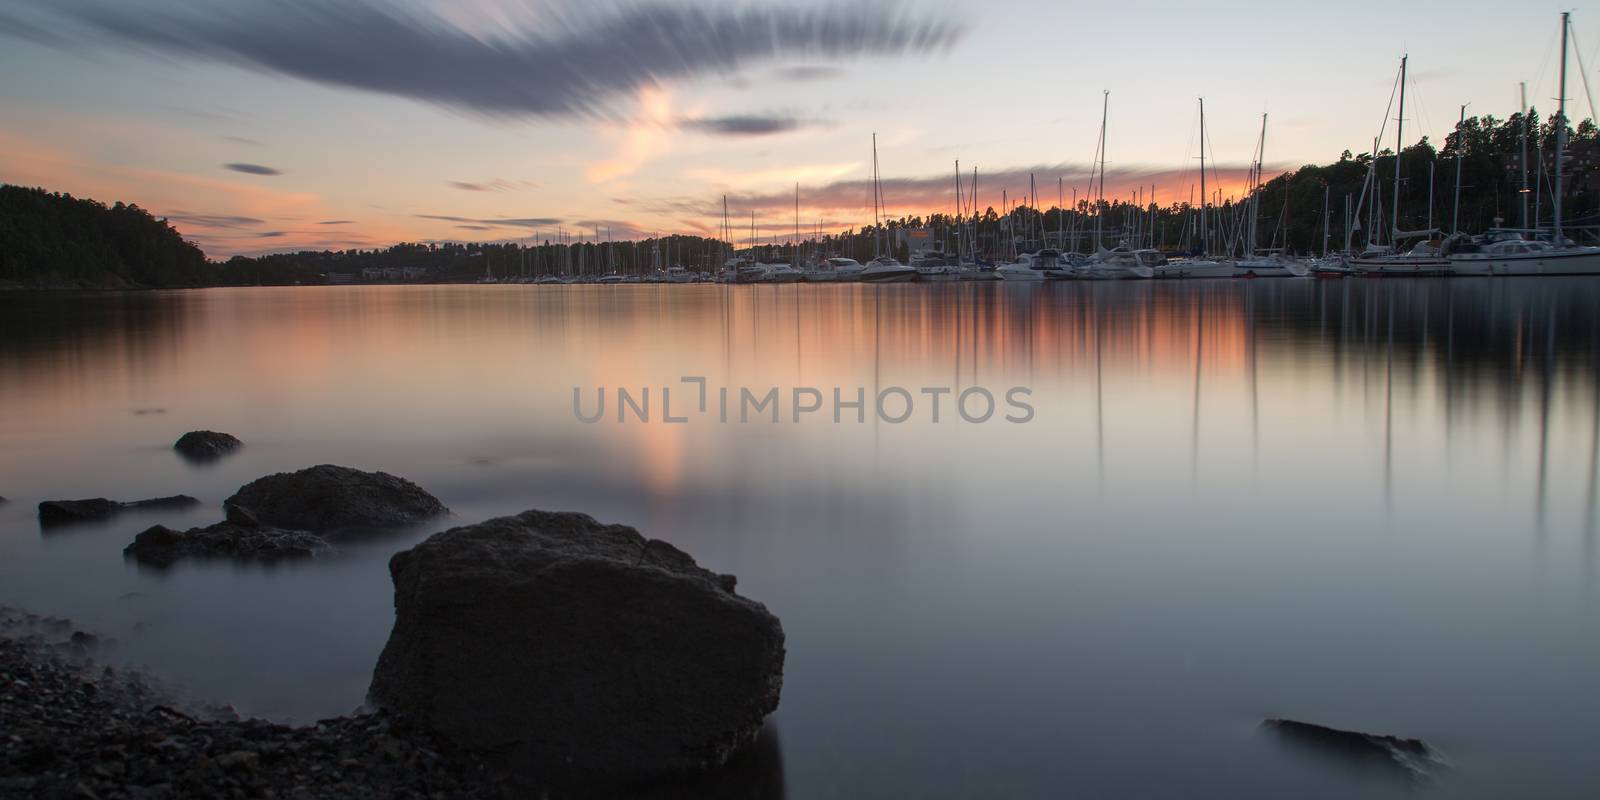 View on a harbor in Oslo with long exposure